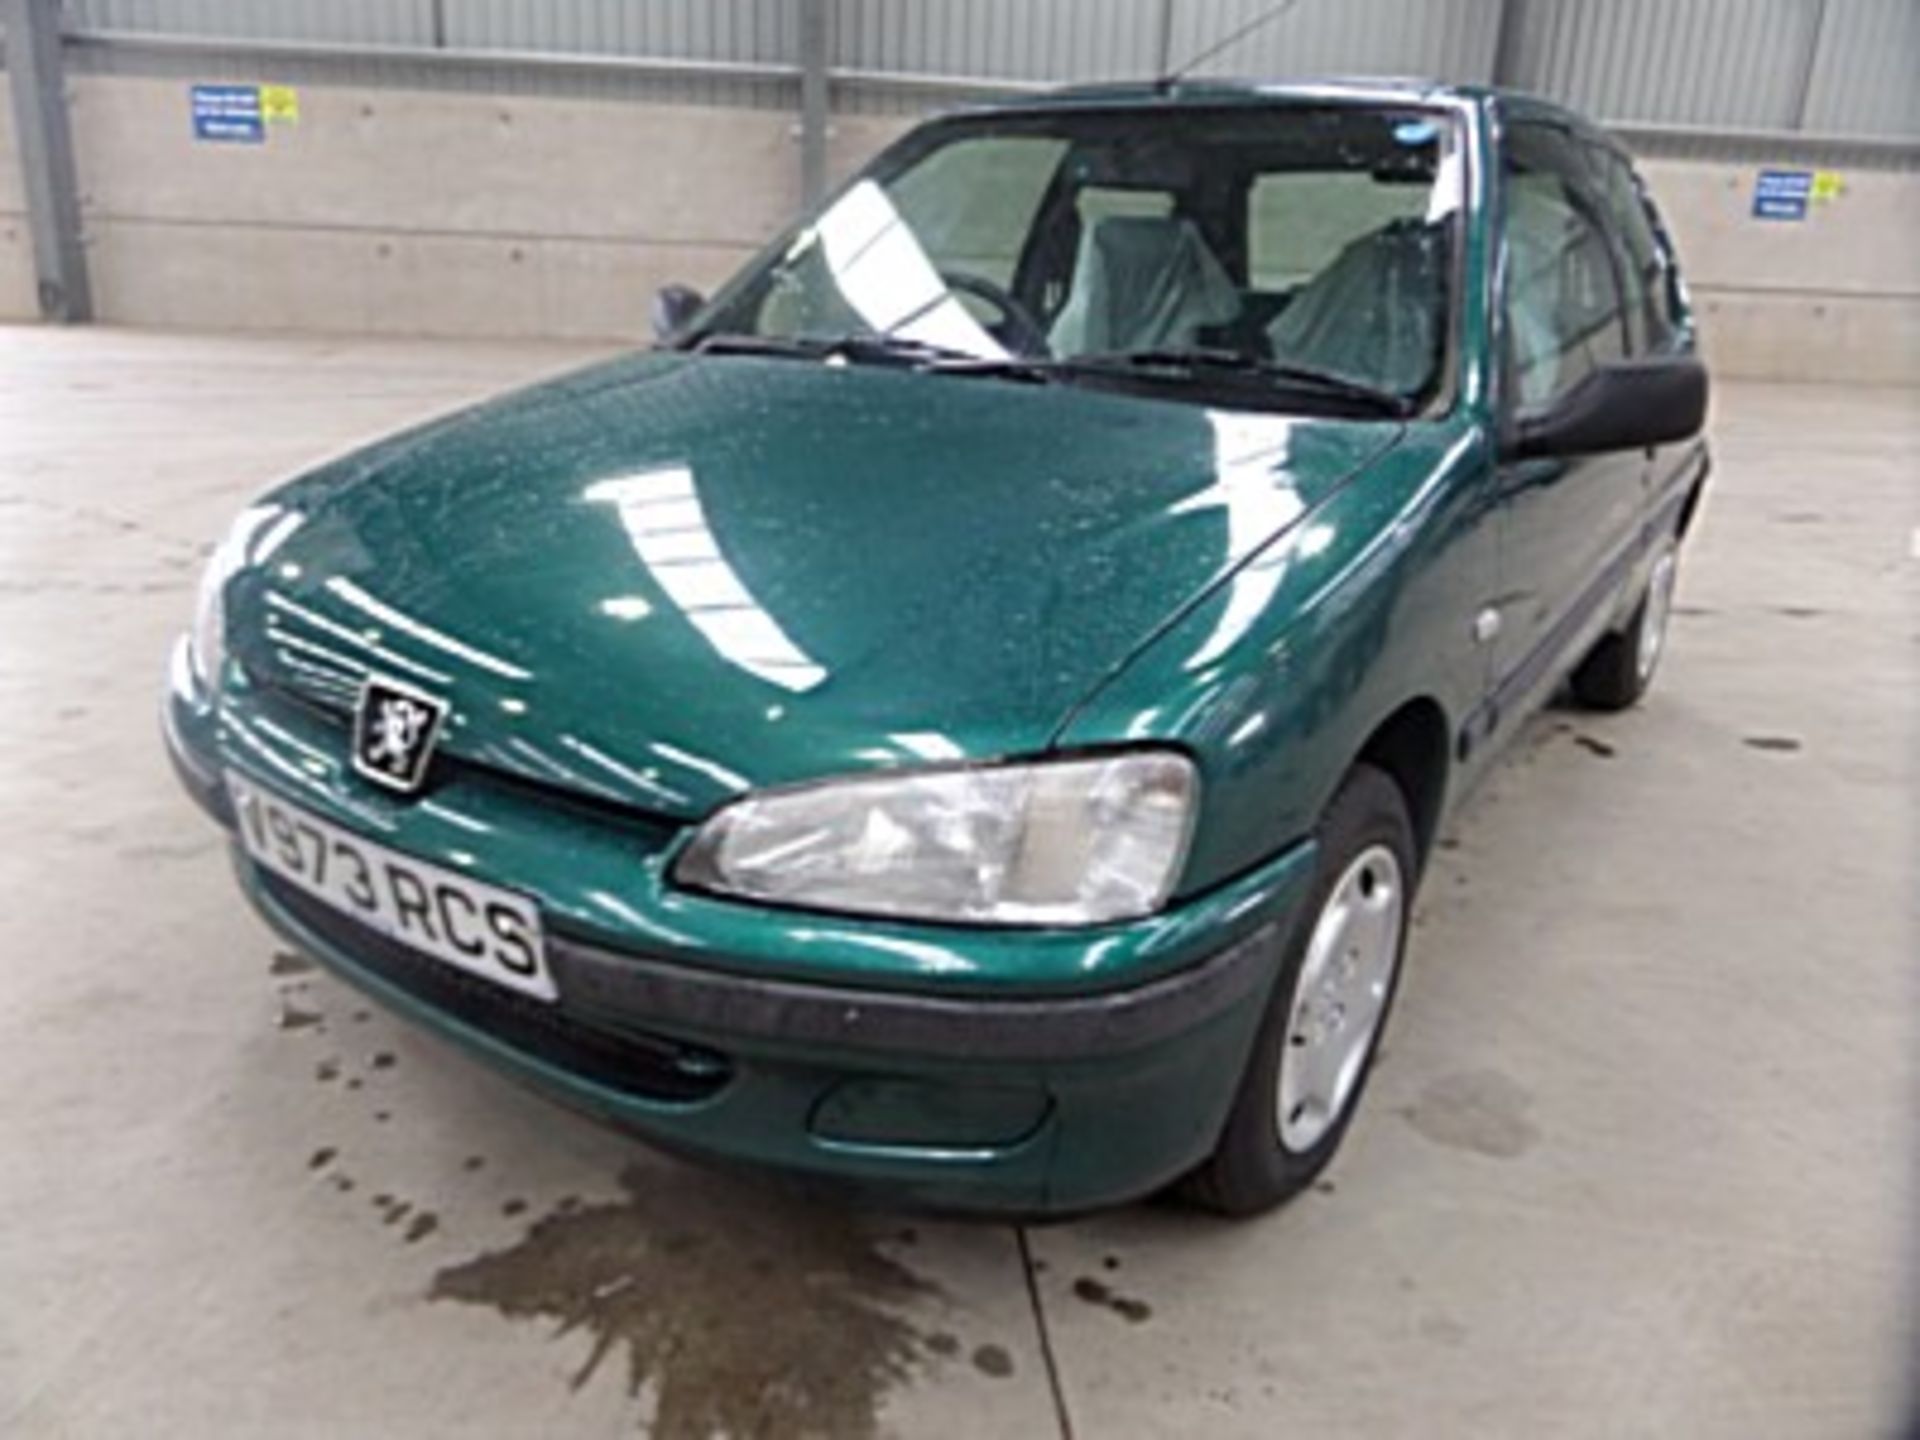 PEUGEOT, 106 XN ZEST 2 - 1124cc, Chassis number VF31CHDZE52504218 - this one owner from new - Image 3 of 7